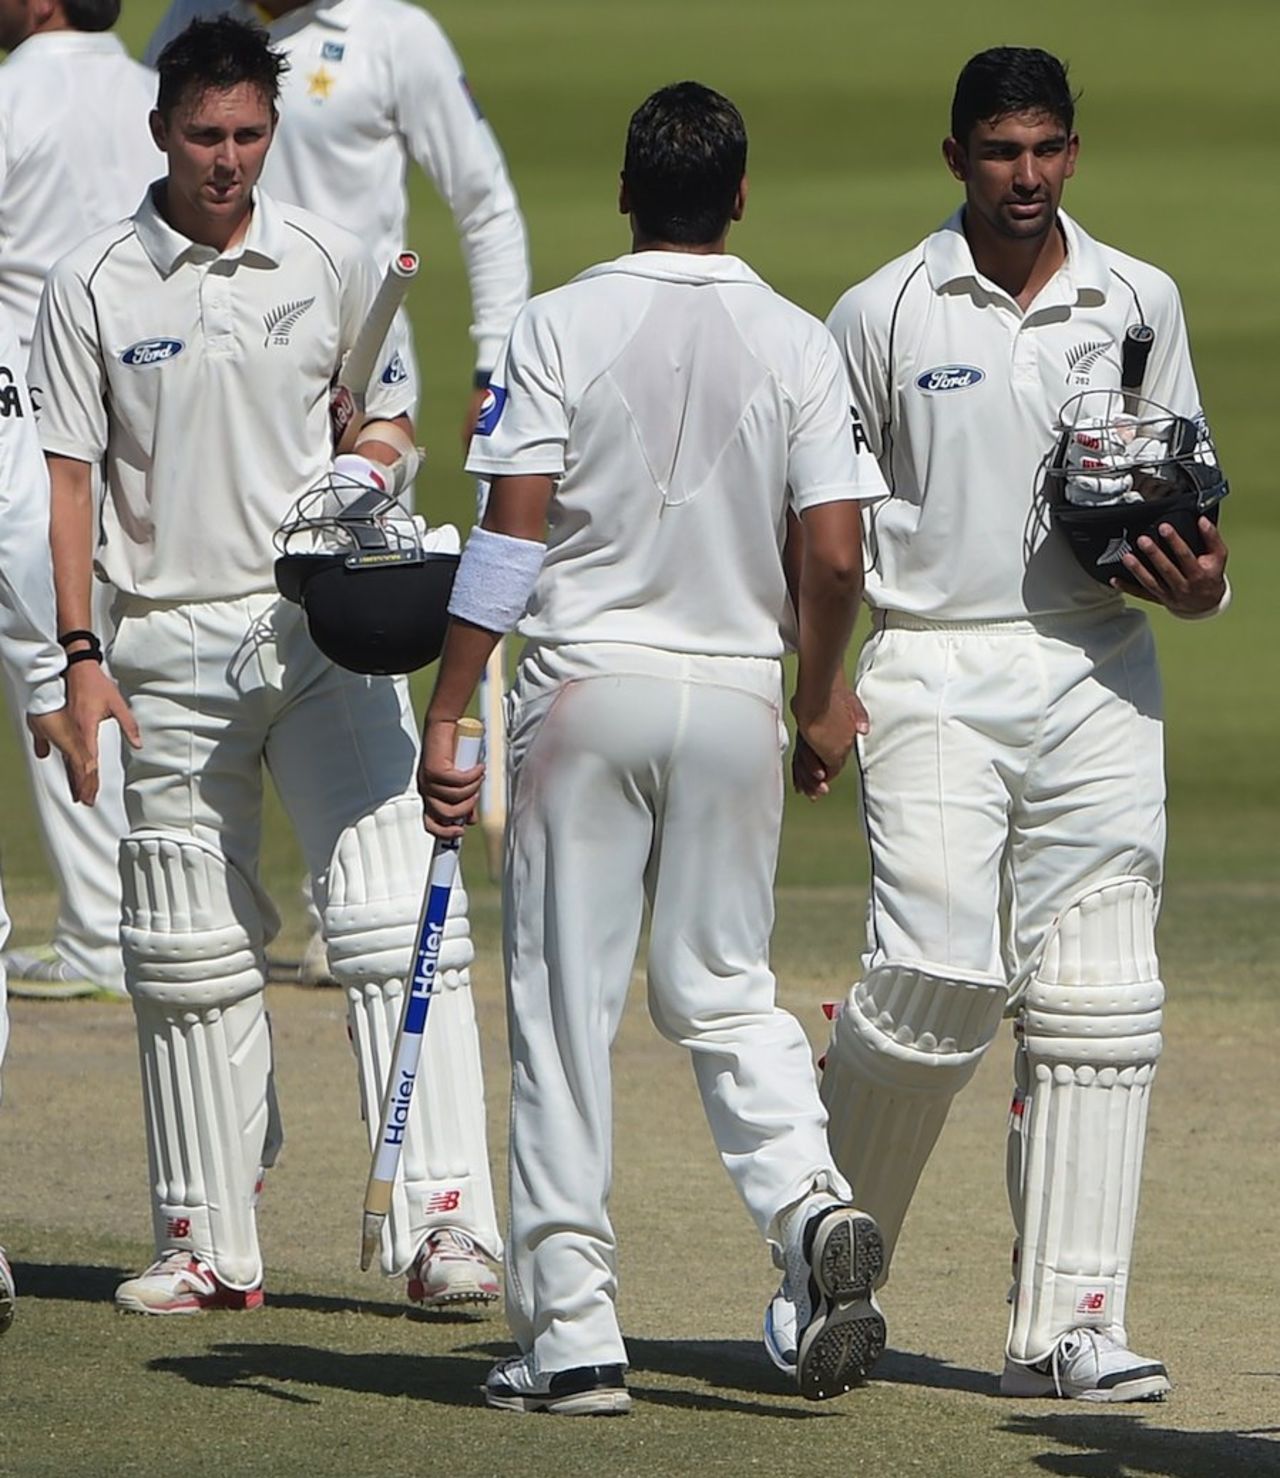 Ish Sodhi and Trent Boult added 54 runs for the last wicket, Pakistan v New Zealand, 1st Test, Abu Dhabi, 5th day, November 13, 2014